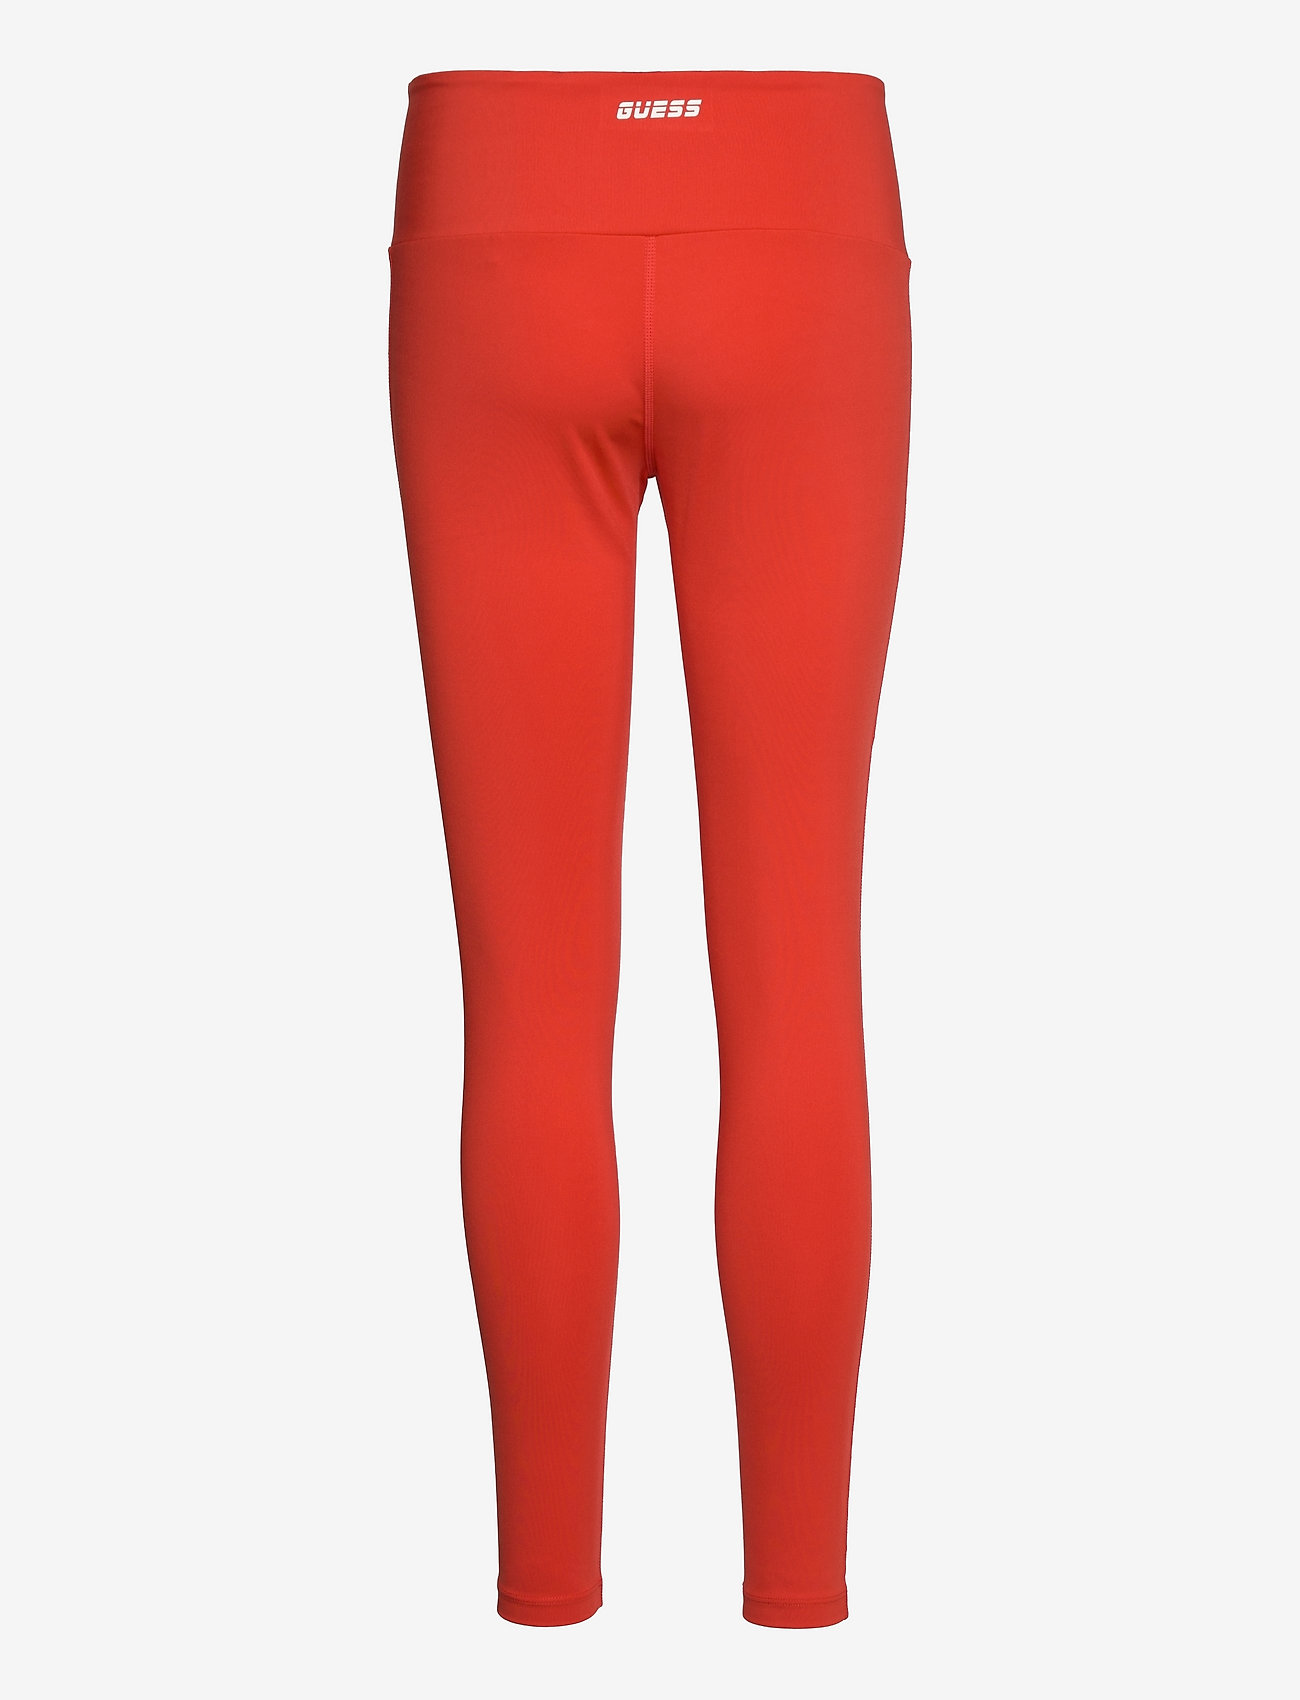 Guess Activewear - AGATHA LEGGINGS 4/4 - träningstights - ardent red - 1